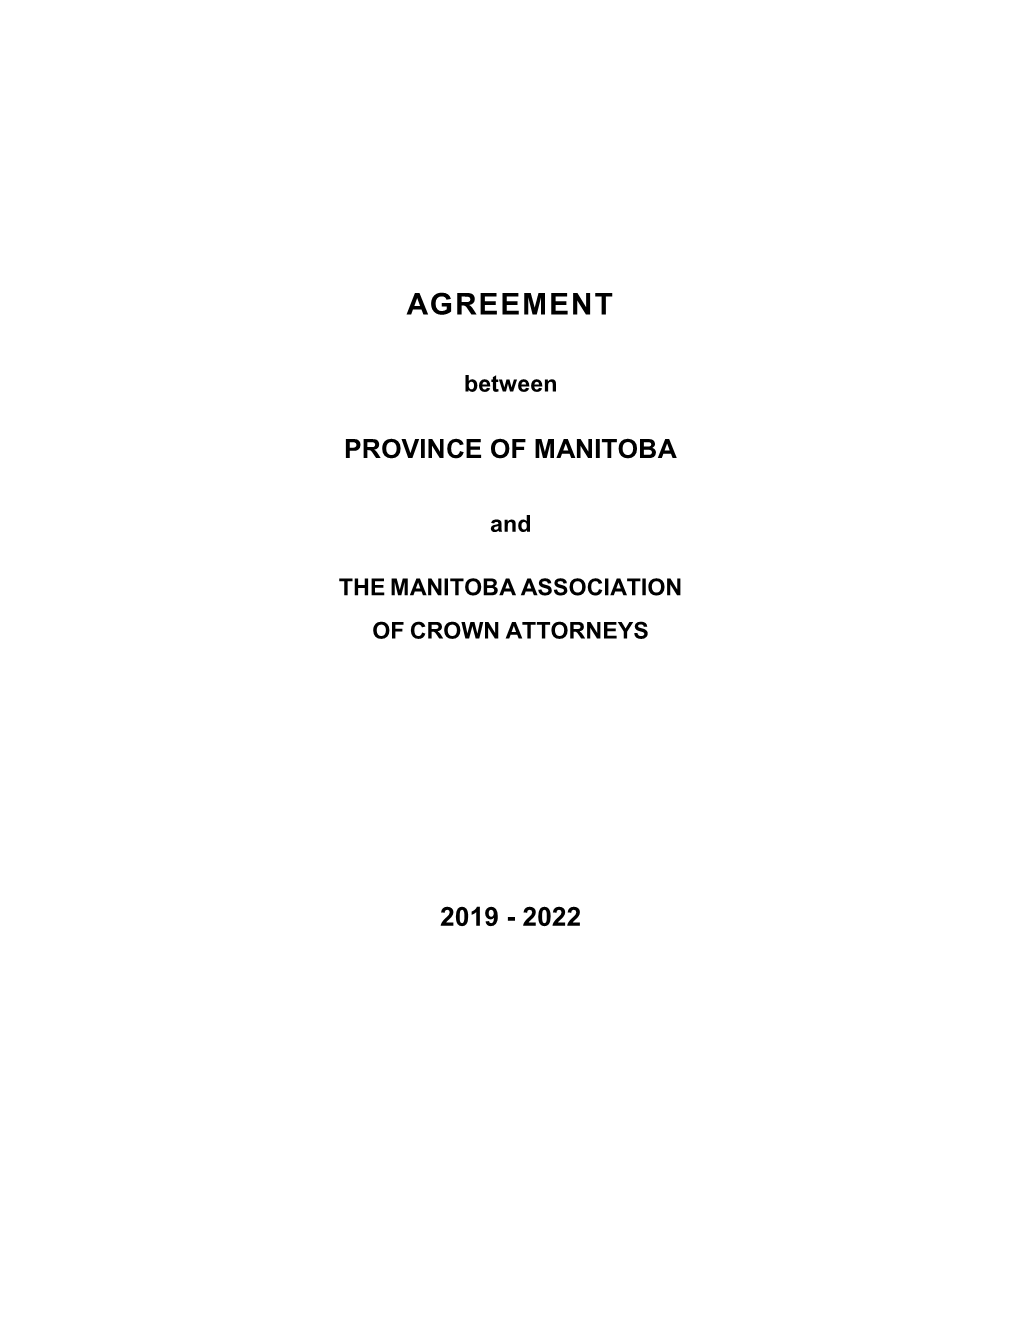 The Manitoba Association of Crown Attorneys